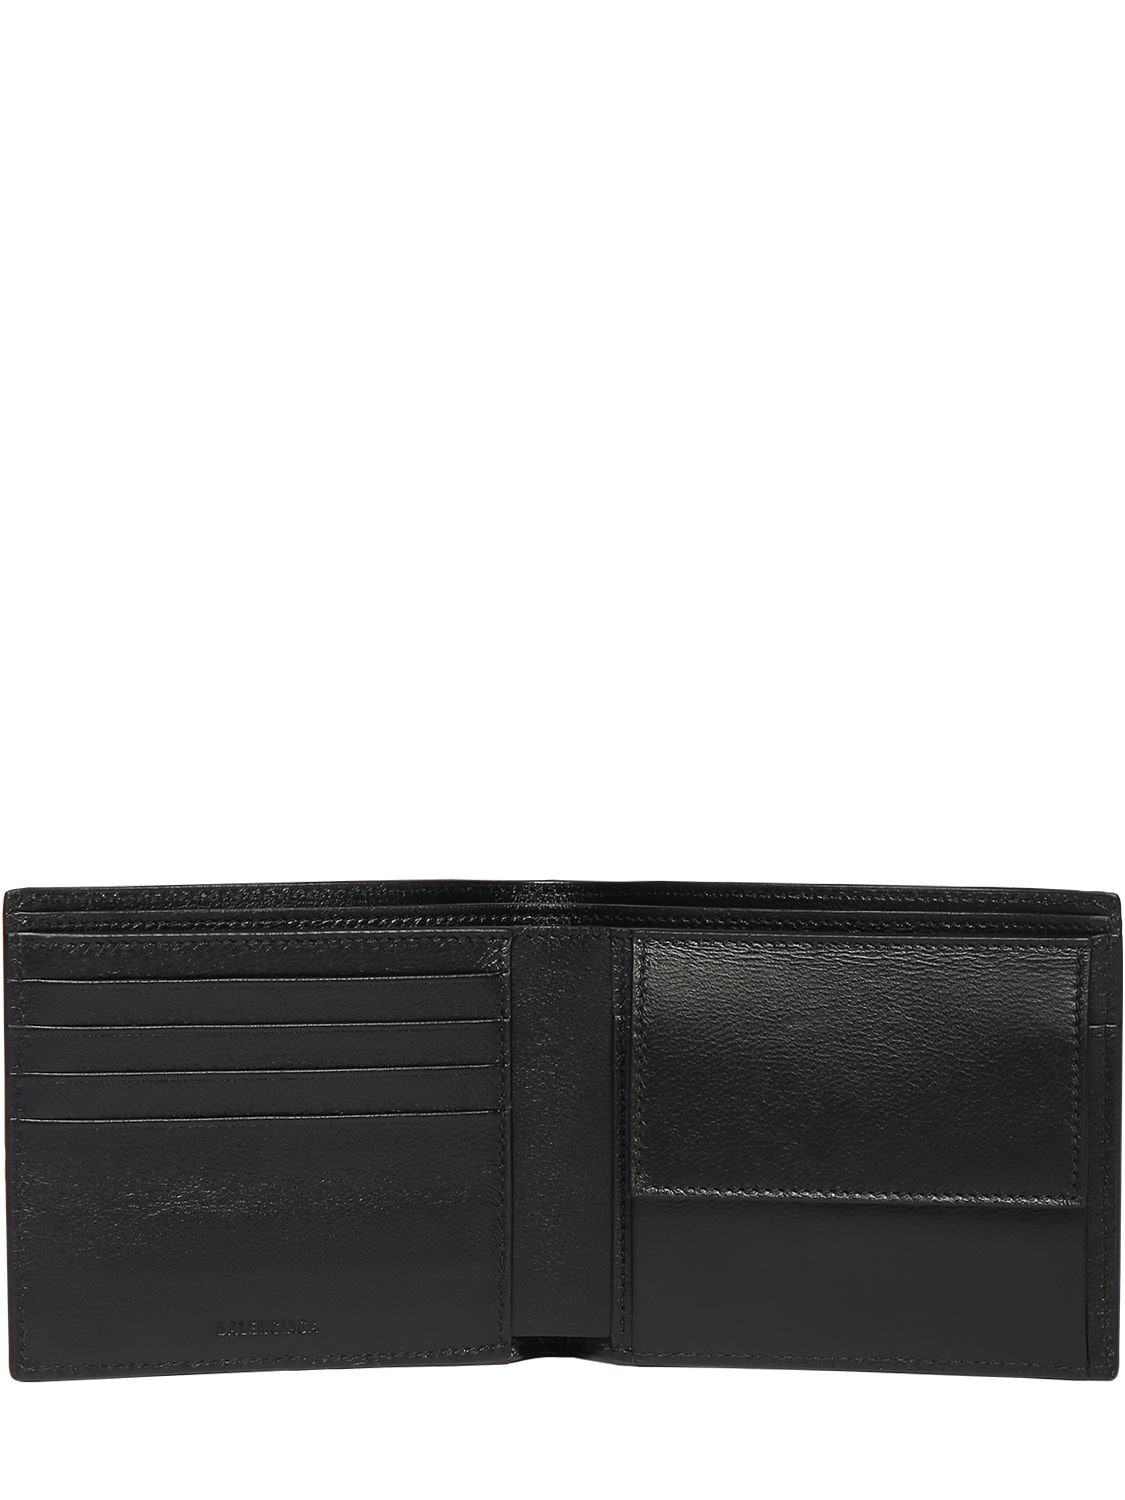 Shop Balenciaga Logo Perforated Leather Wallet In Black